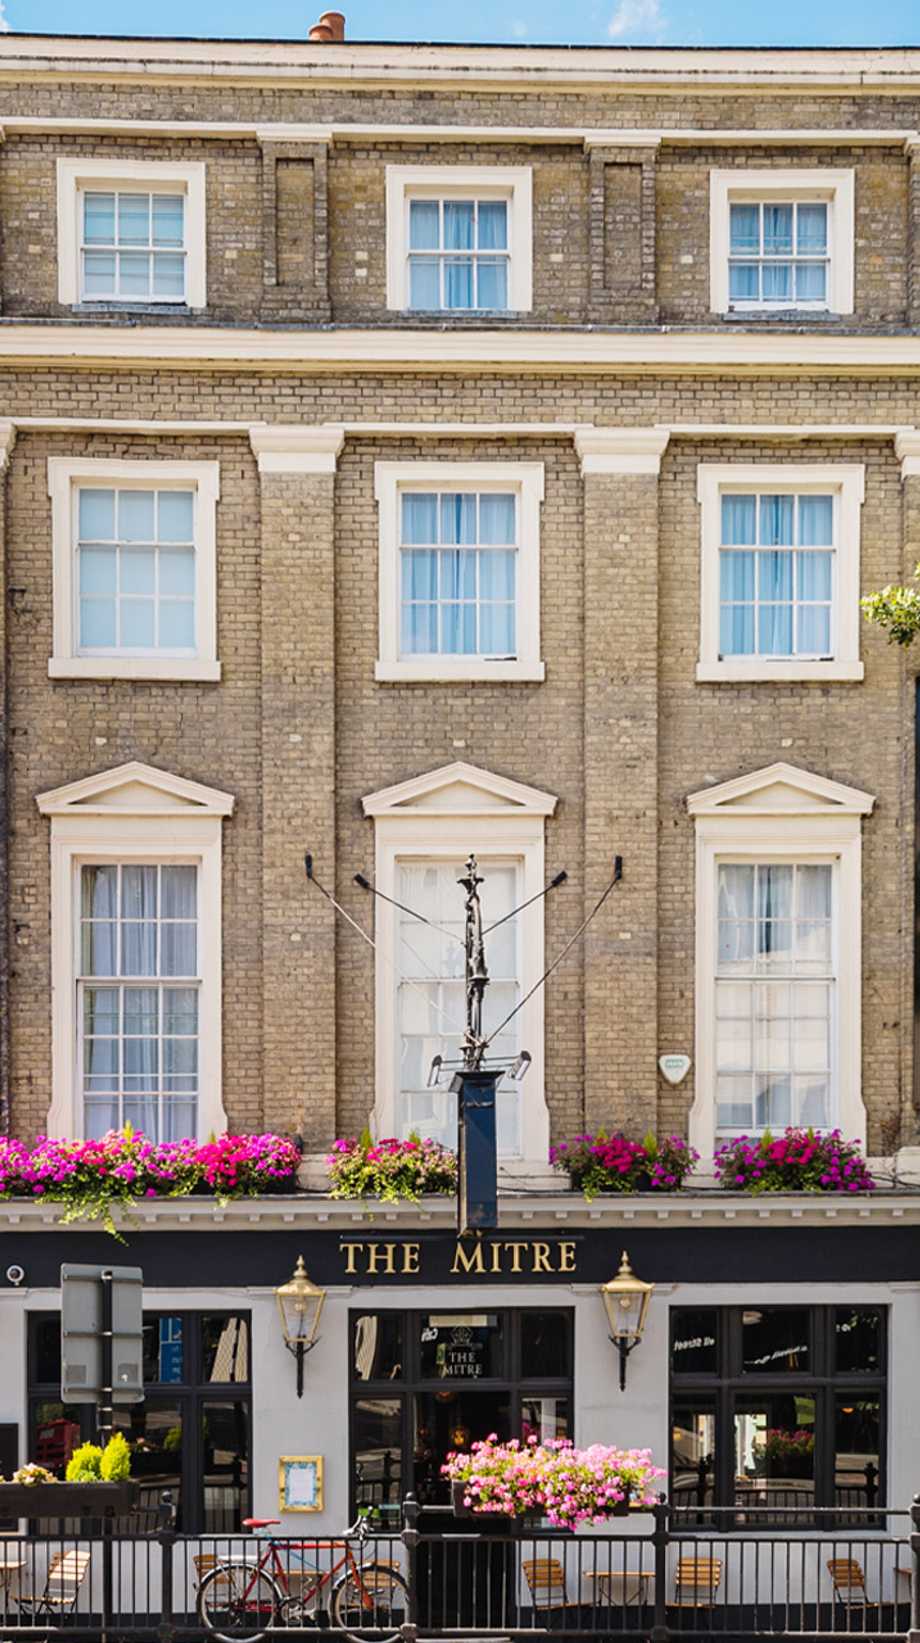 A portrait shot of The Mitre hotel, an Innkeeper's in London. It has high windows and pink window-box flowers with gold lighting adorning the entrance.